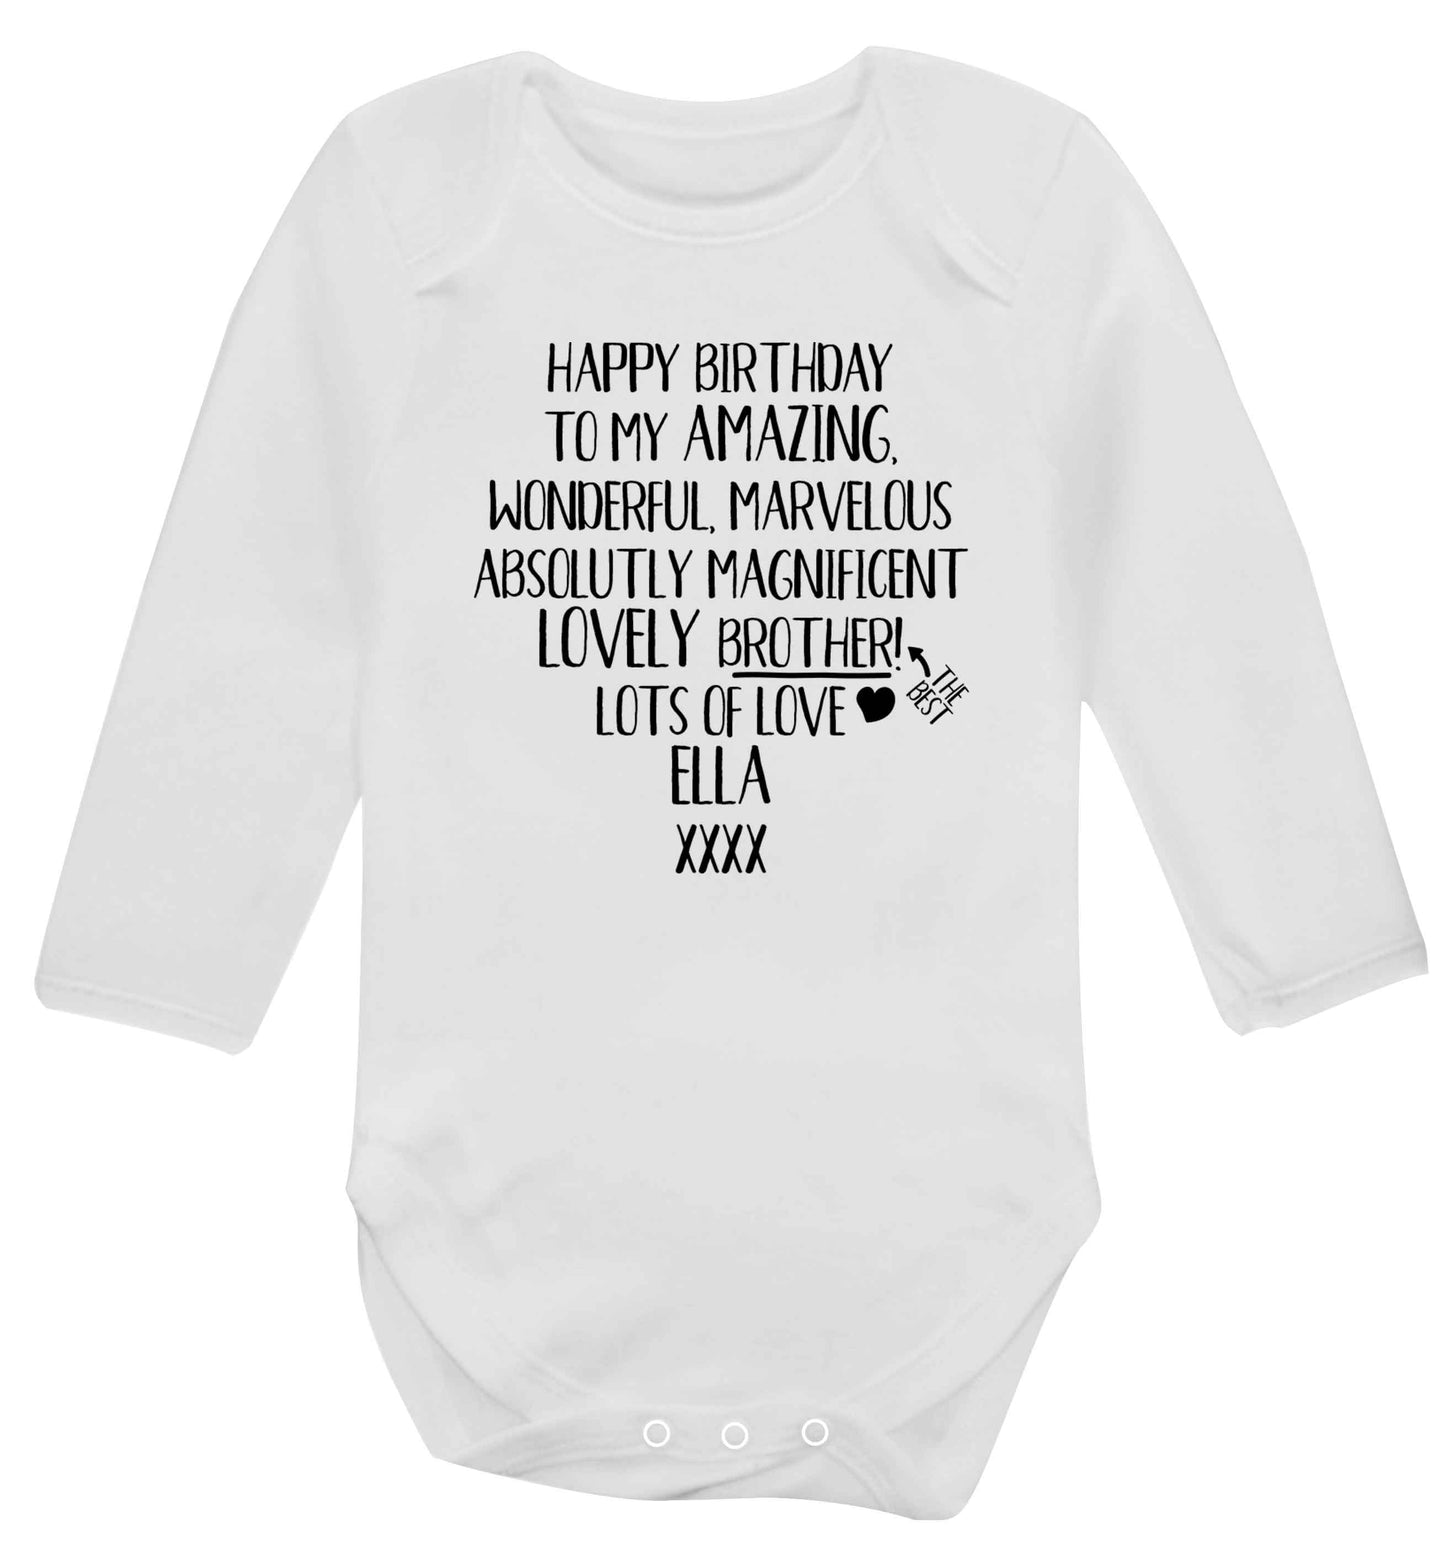 Personalised happy birthday to my amazing, wonderful, lovely brother Baby Vest long sleeved white 6-12 months